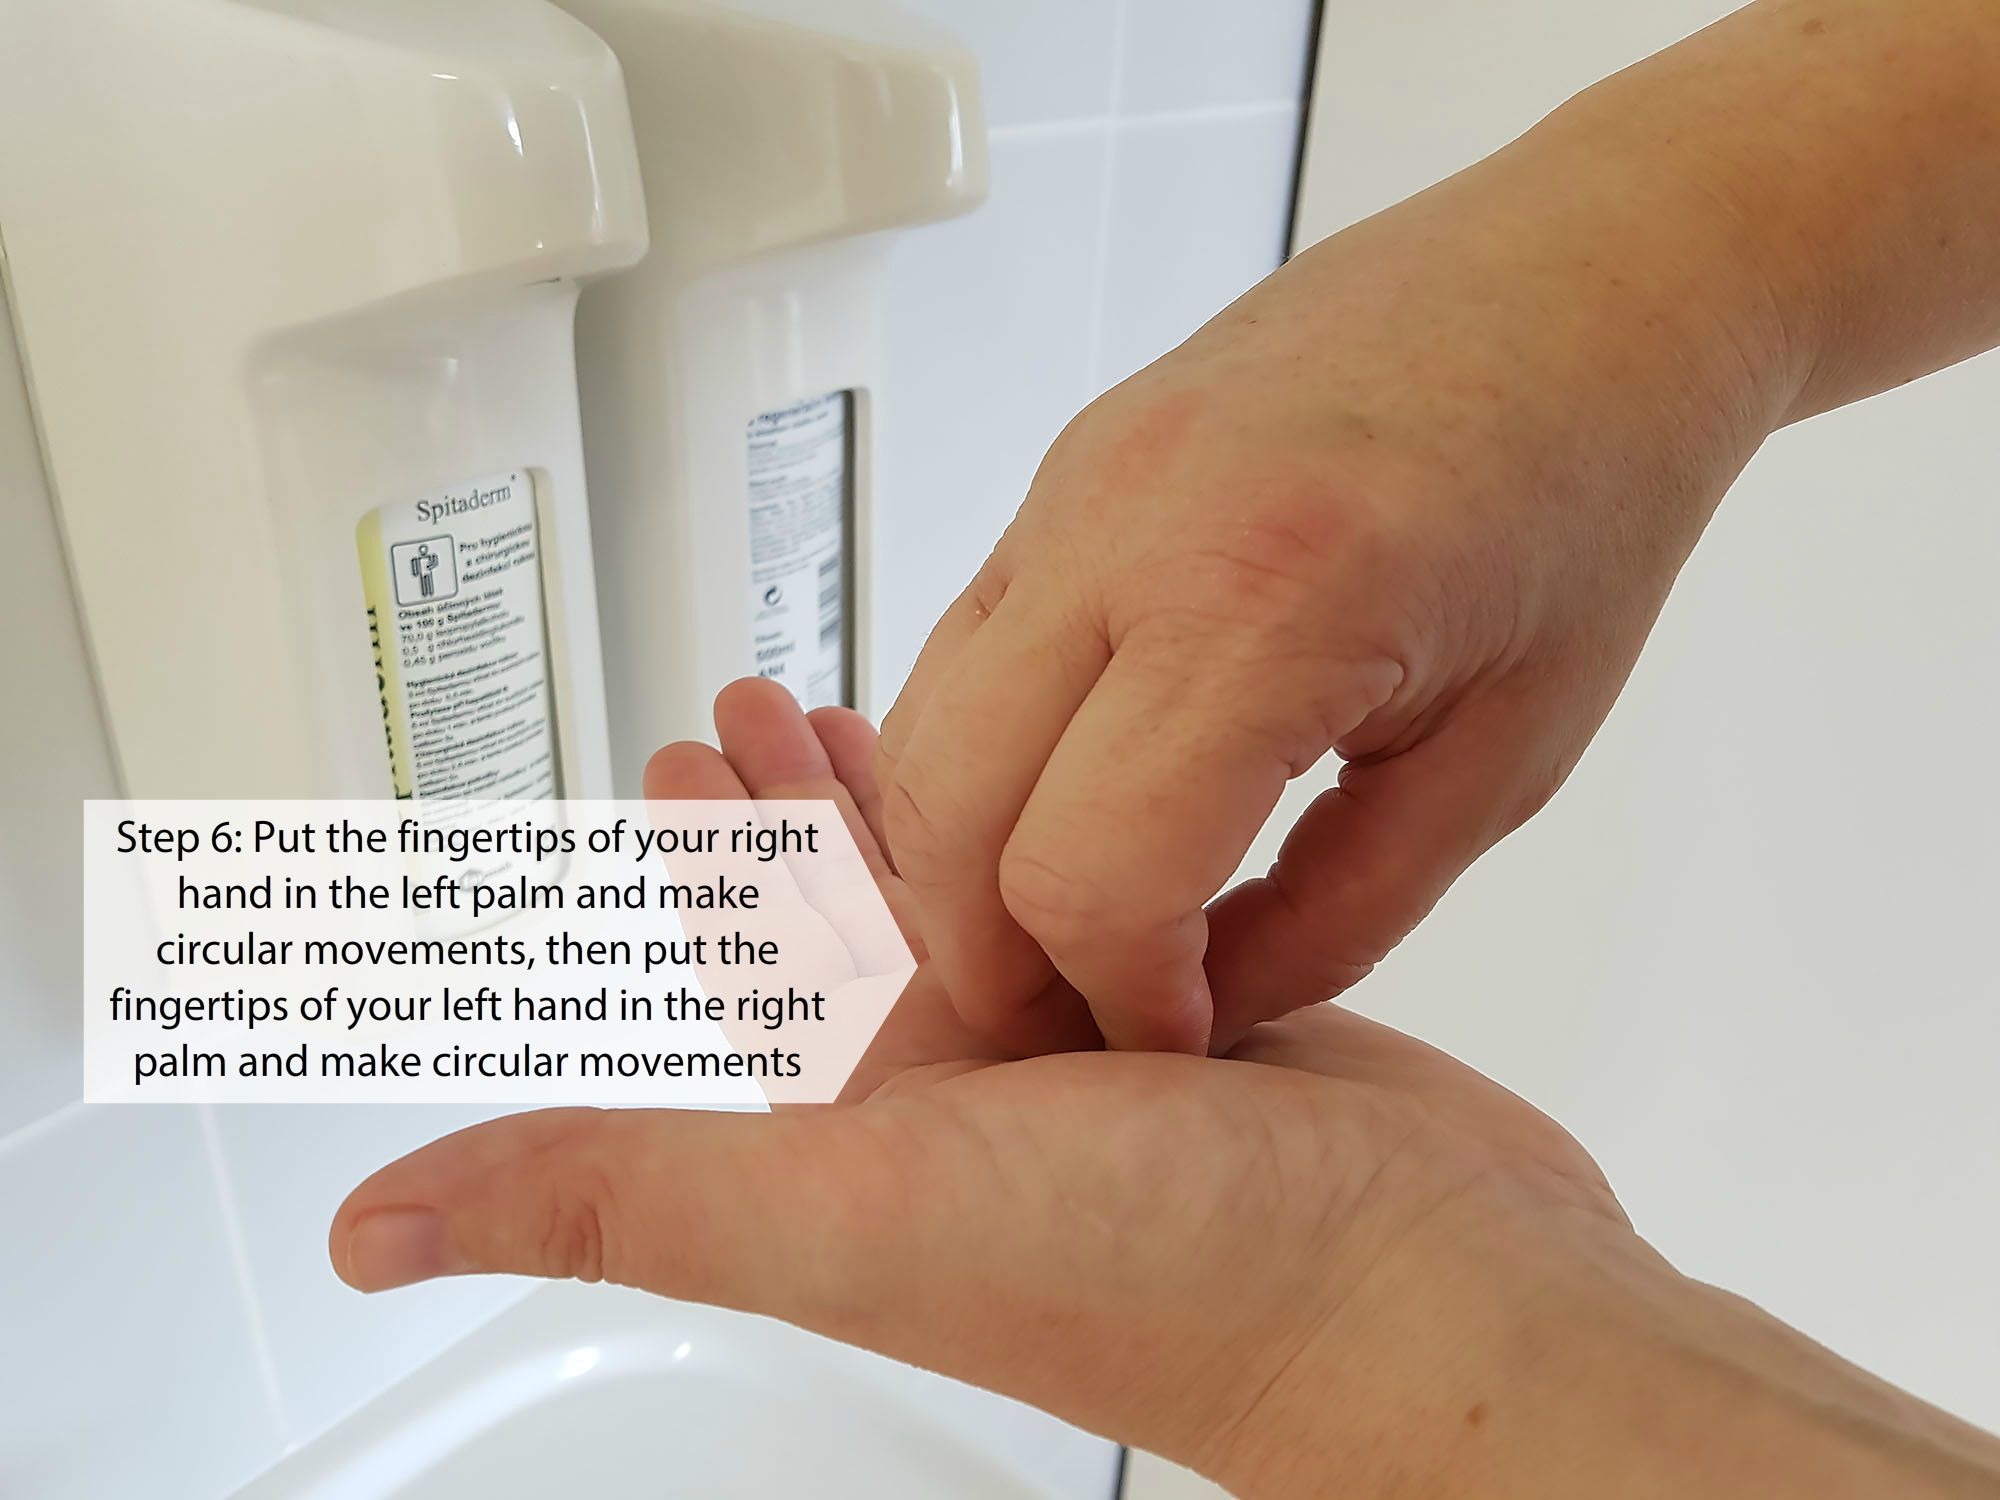 Procedure for rubbing the disinfectant solution during hygienic hand disinfection (Step 6)